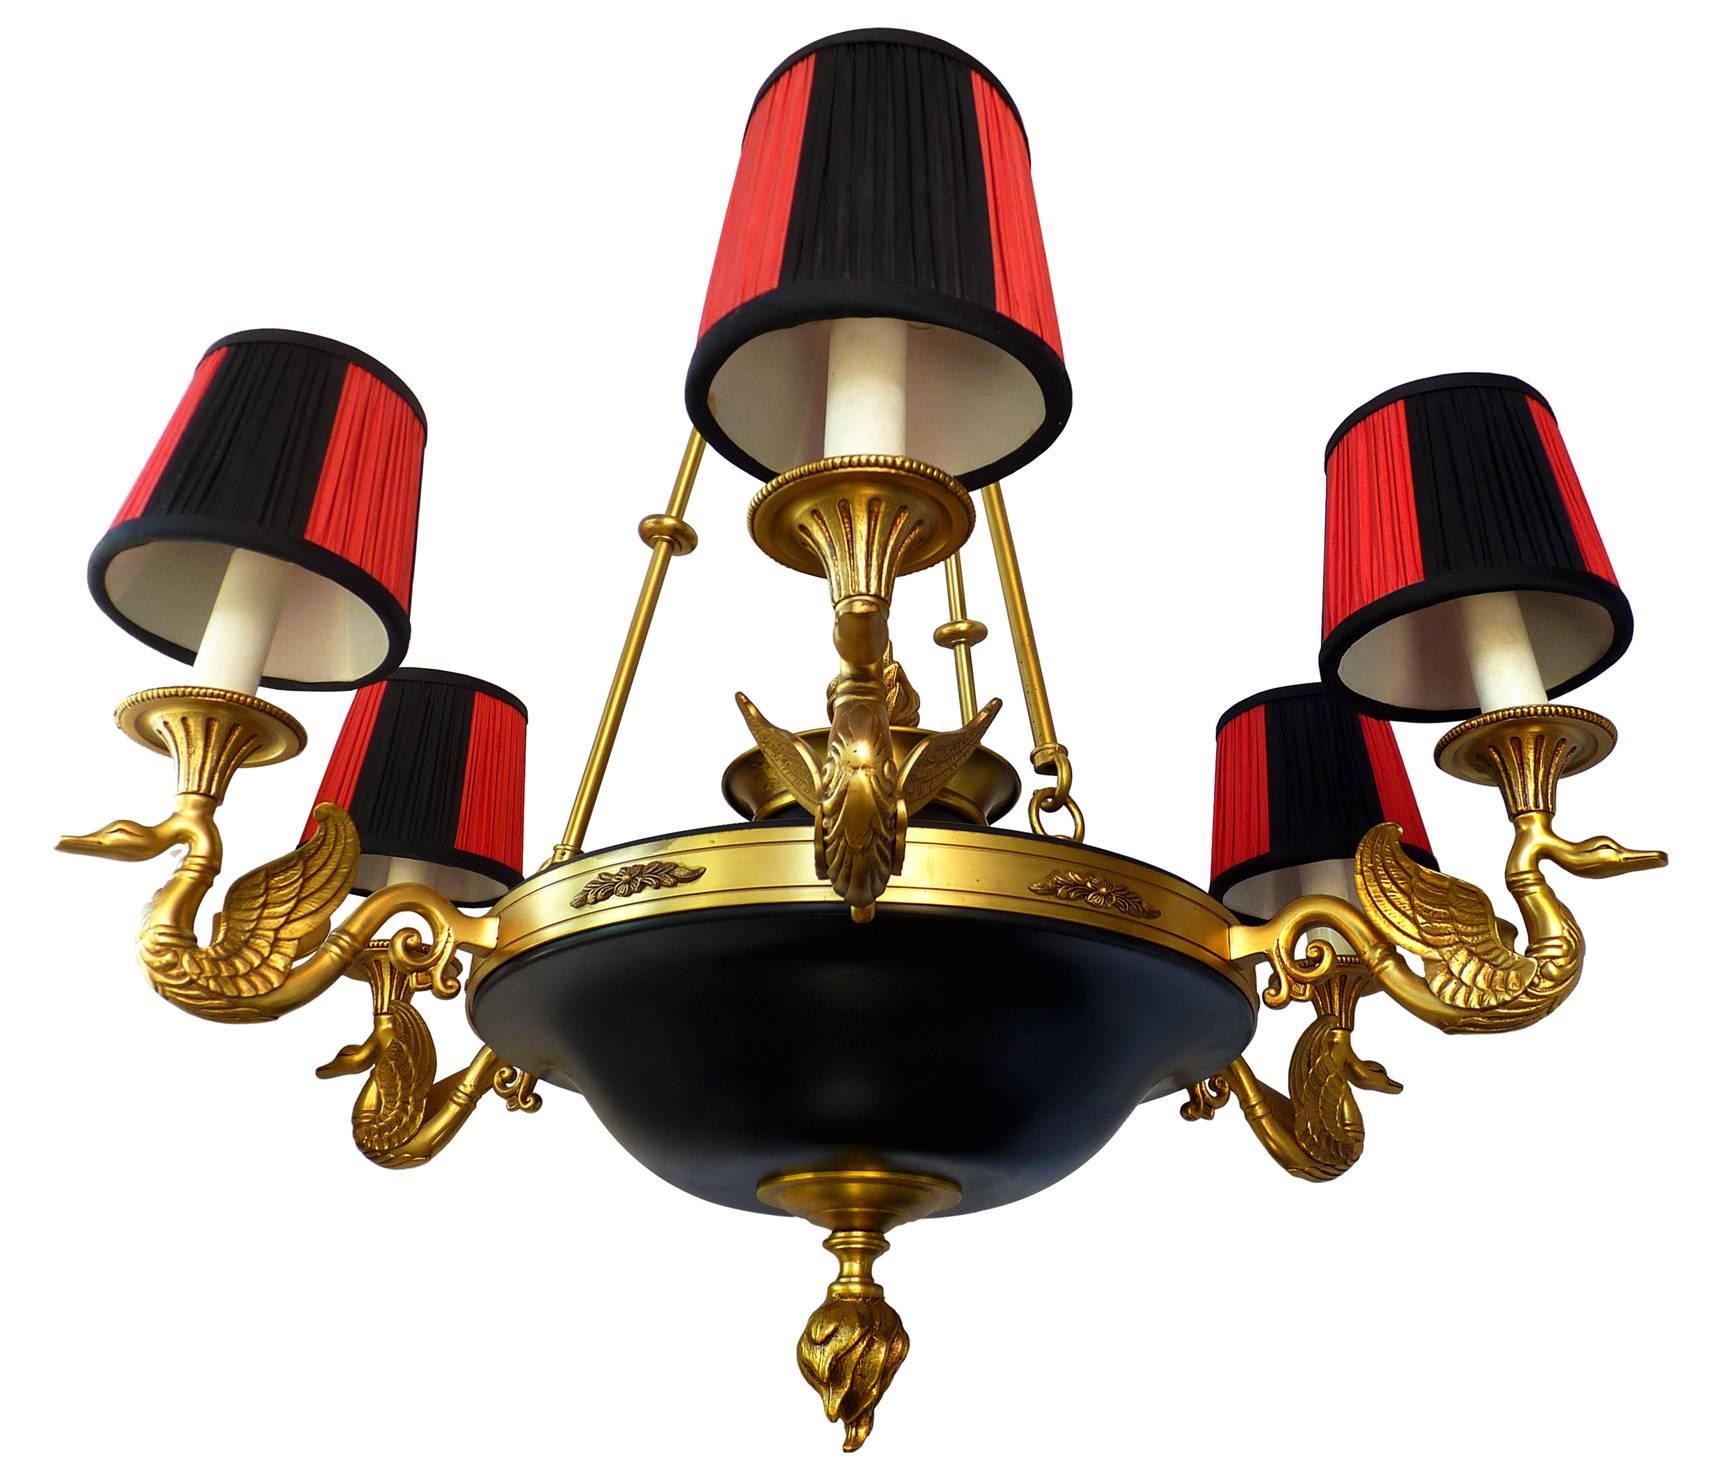 Empire Revival Gilt Bronze French Empire Chandelier, 6 Swan Arms and Red and Black Lampshades